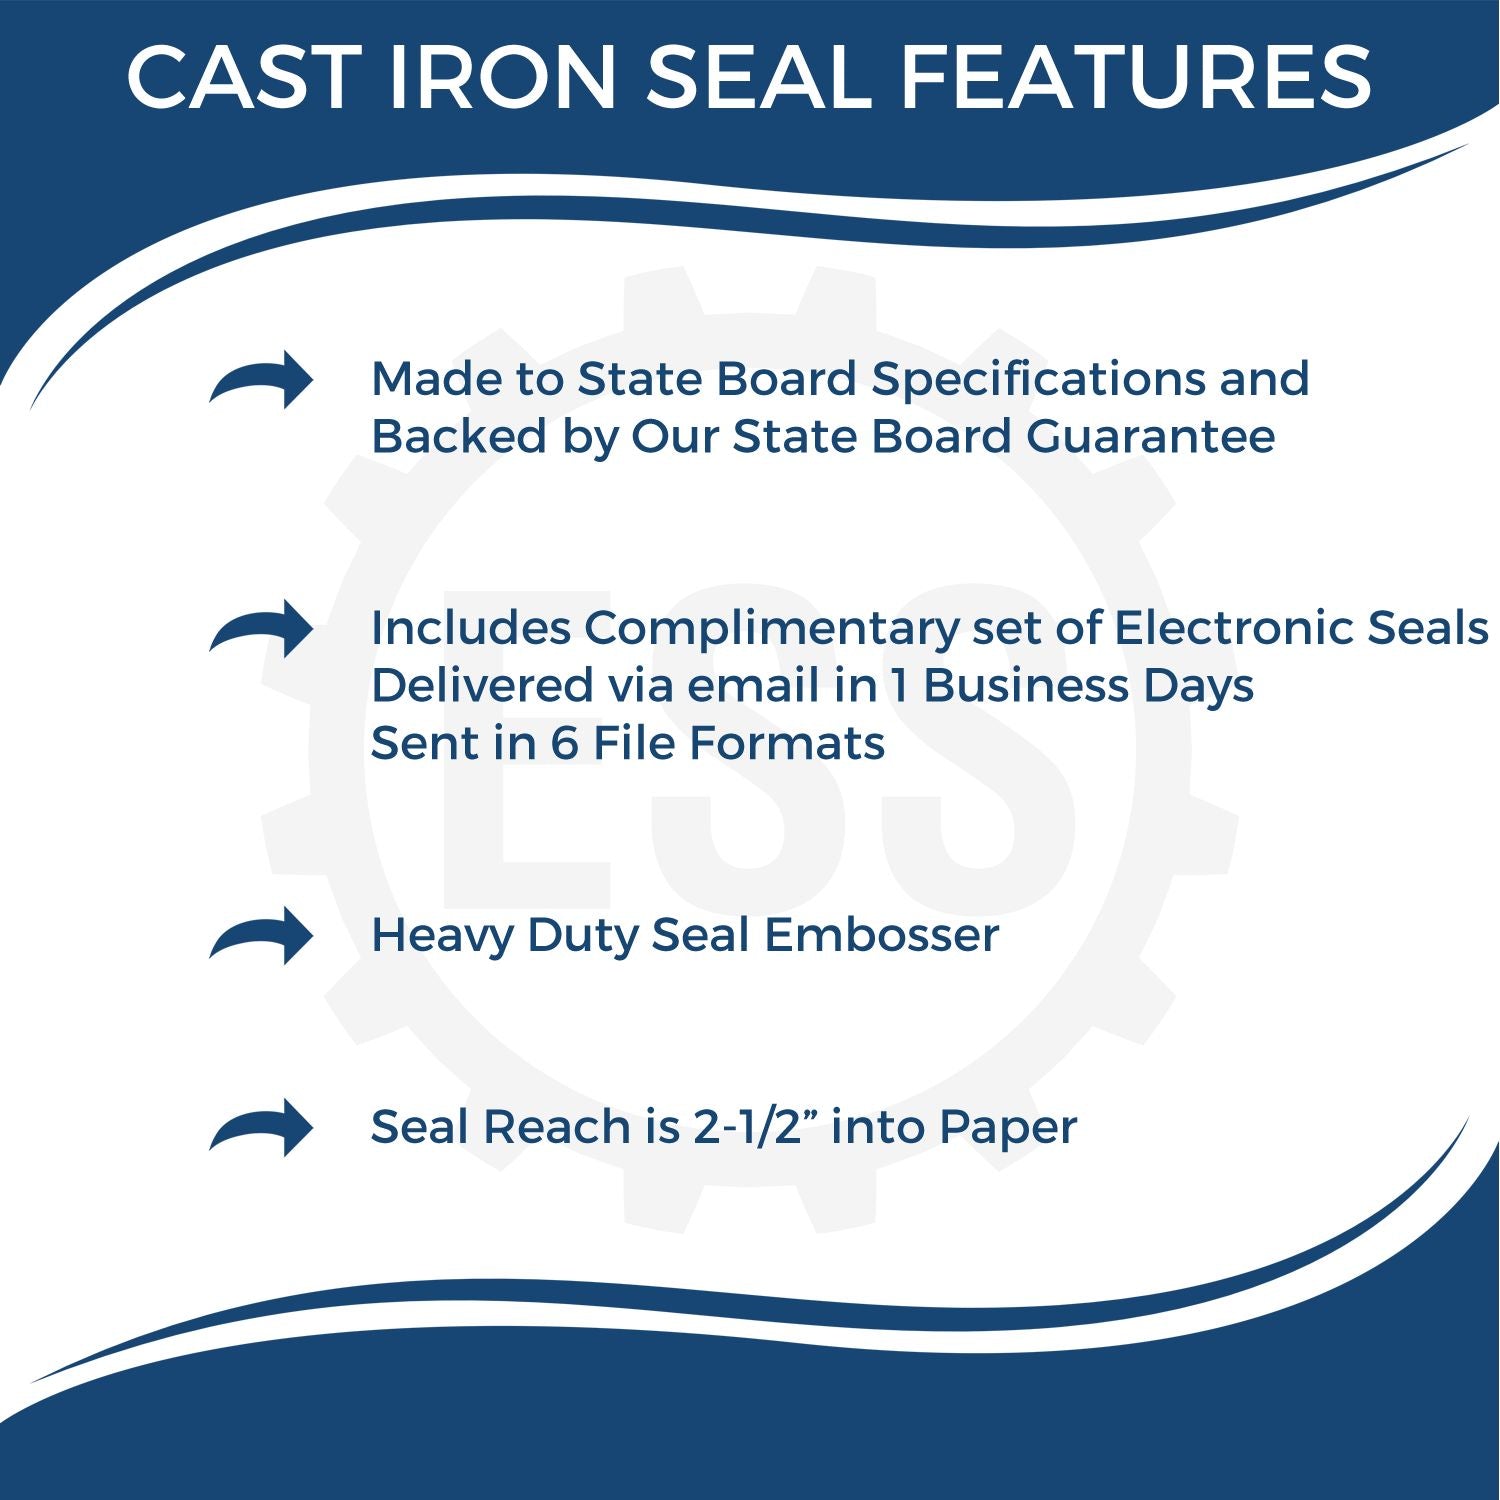 The main image for the Heavy Duty Cast Iron Hawaii Engineer Seal Embosser depicting a sample of the imprint and electronic files